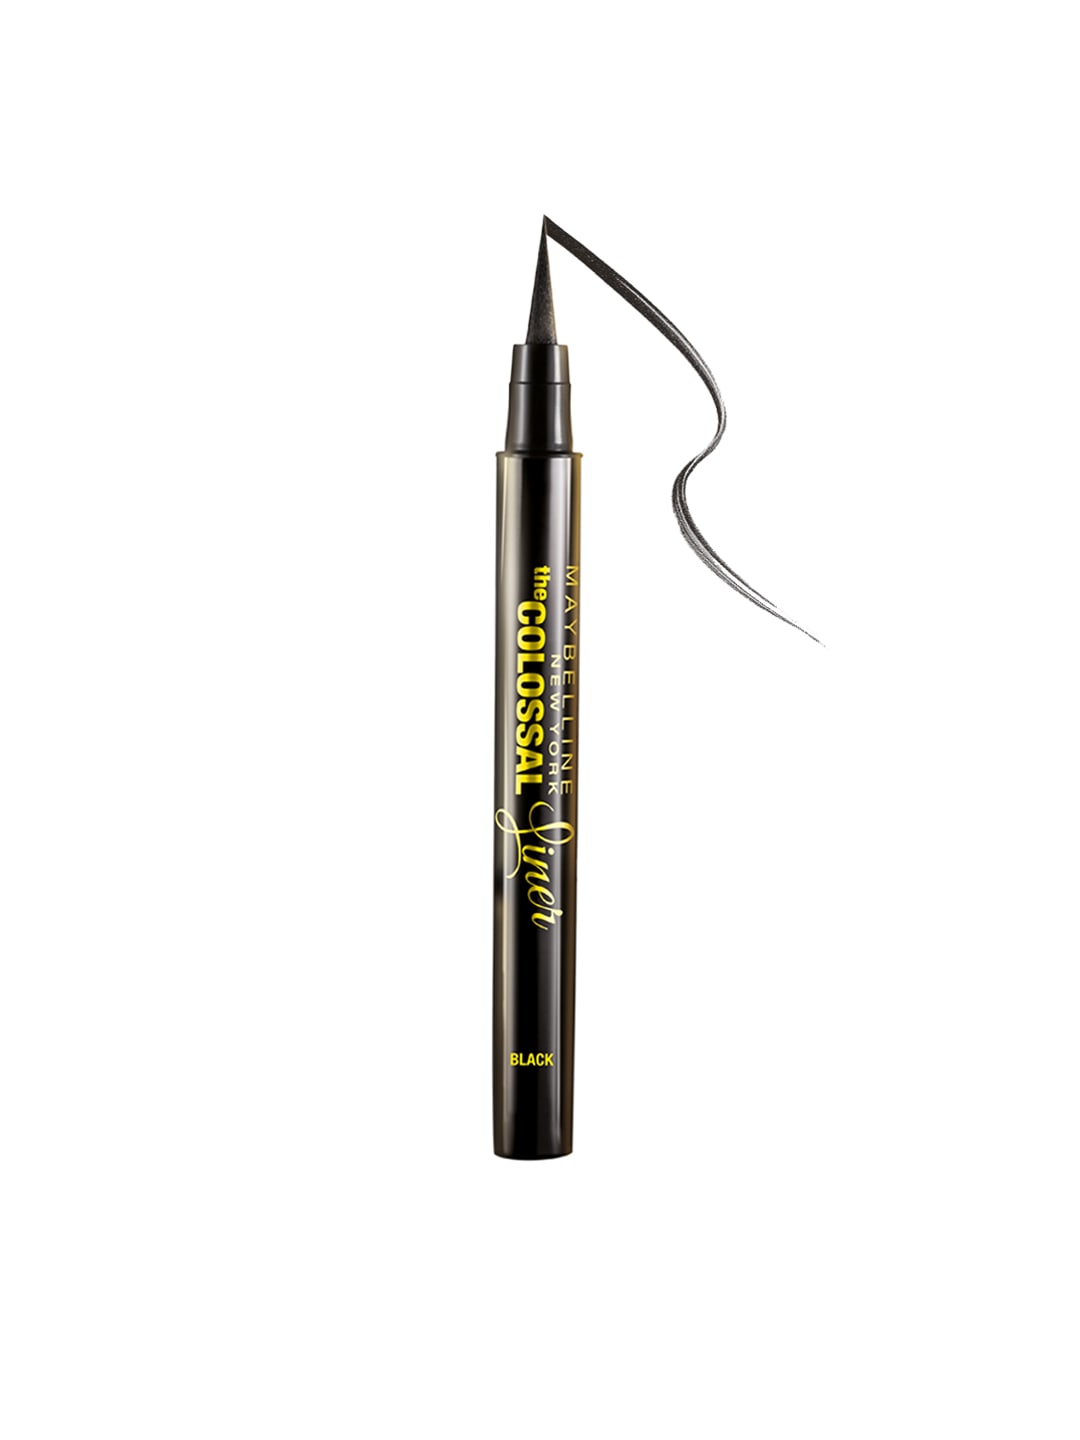 Maybelline The Colossal Eyeliner - Black Price in India